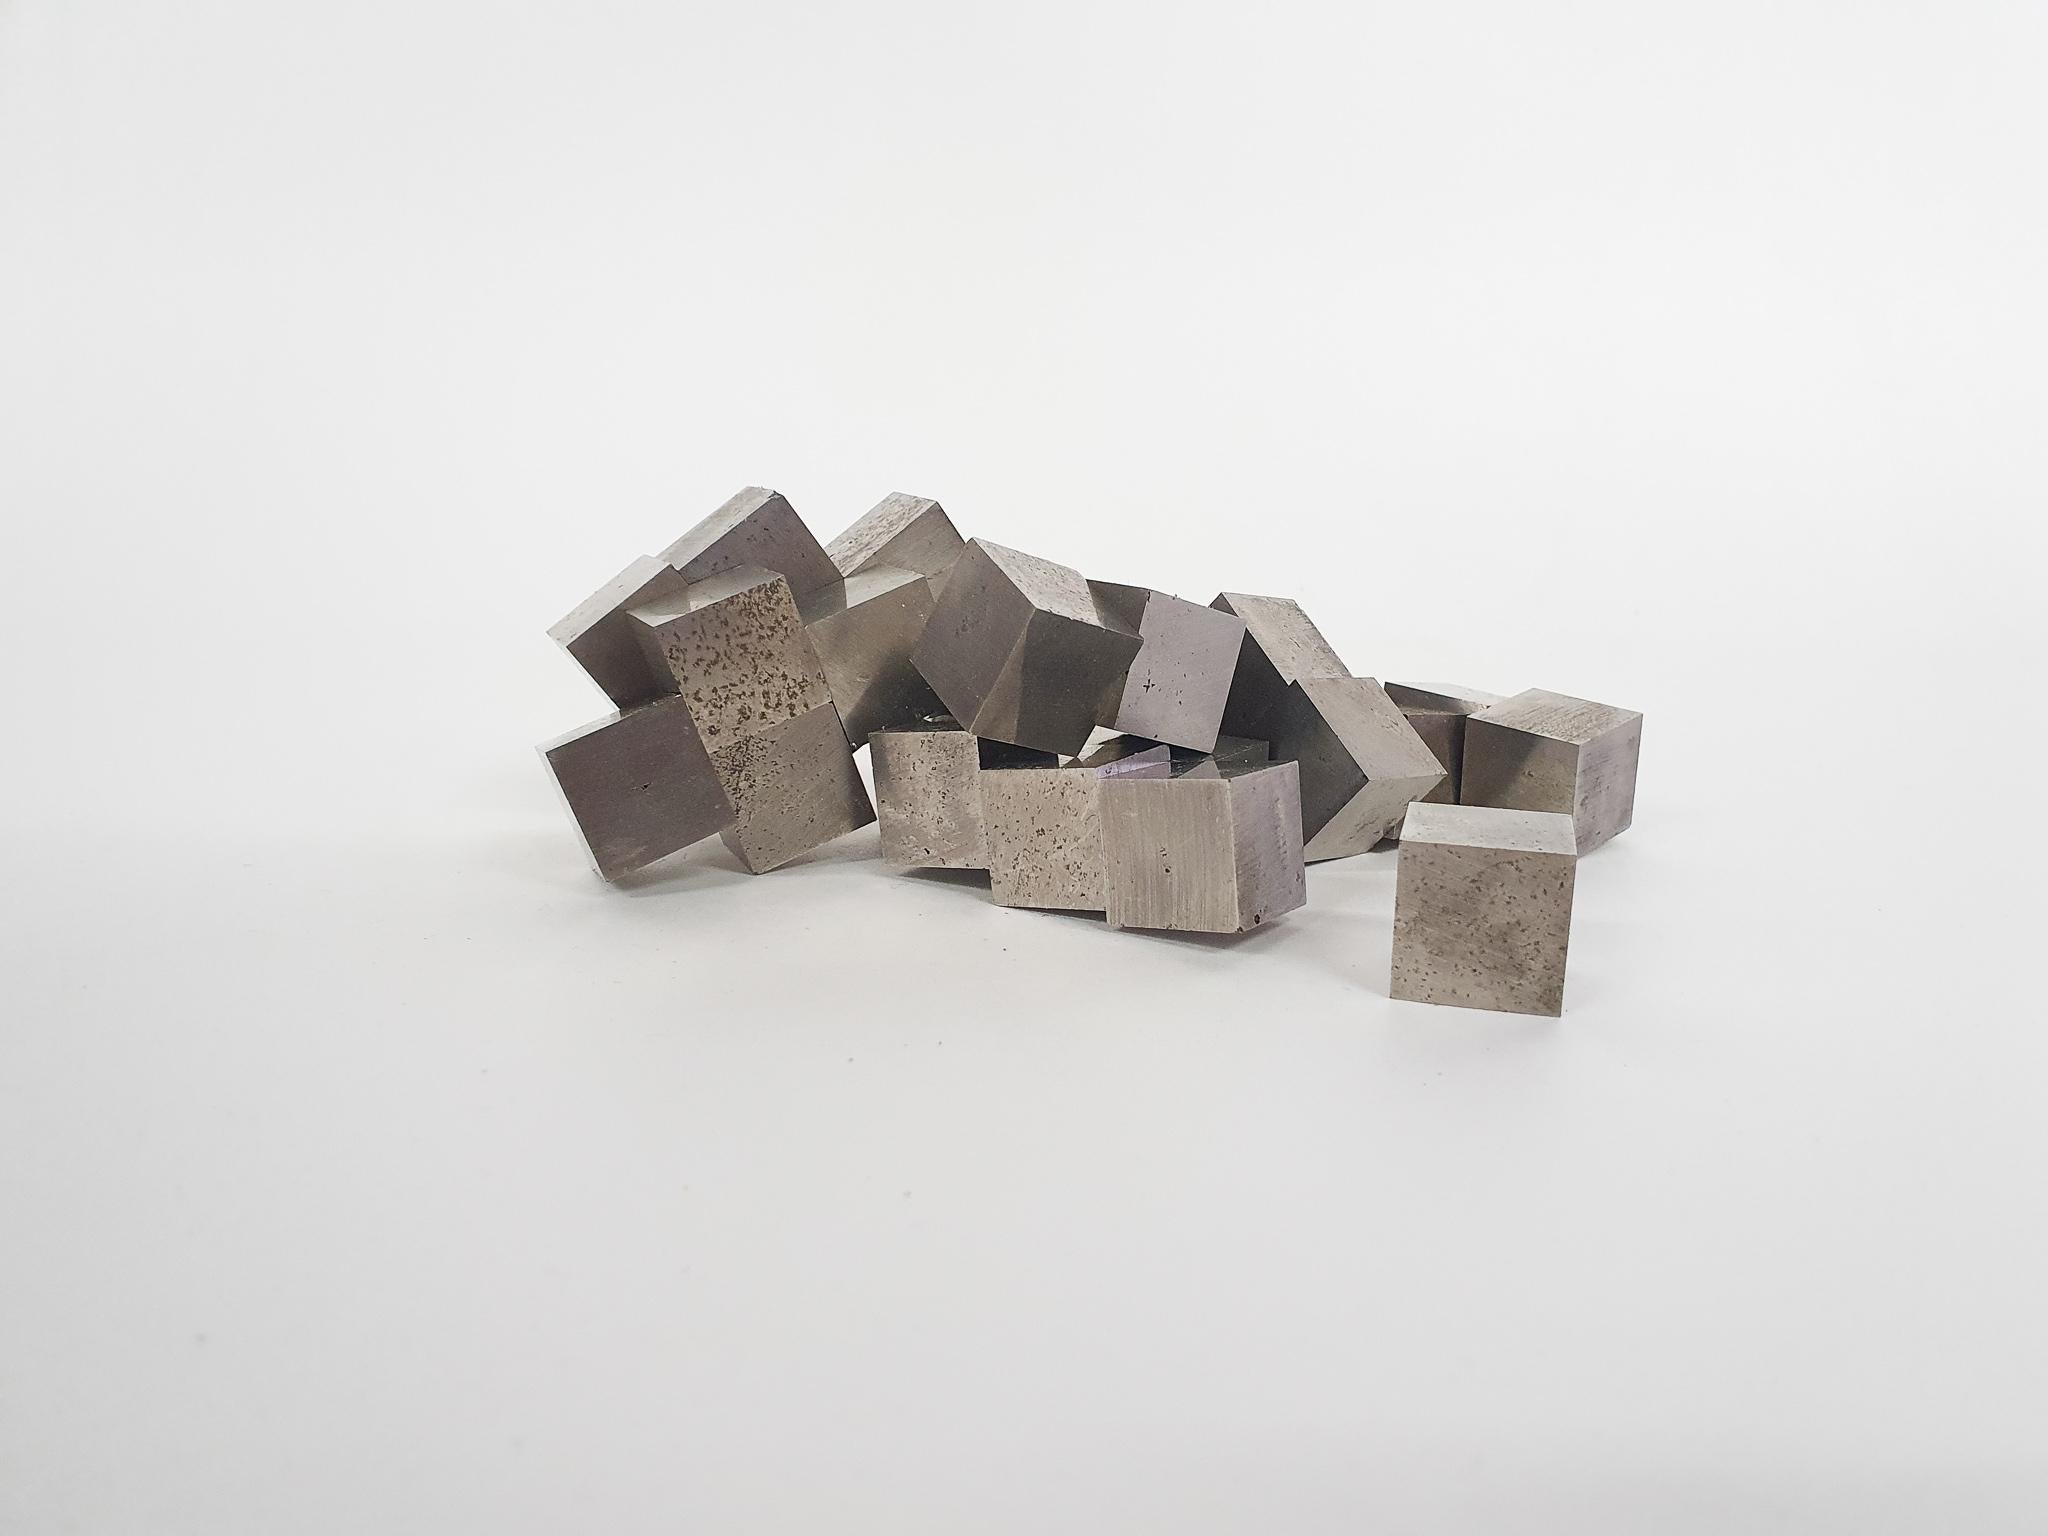 27 metal magnetic blocks of each 2 x 2 x 2cm. As a decorative object or as building toys.